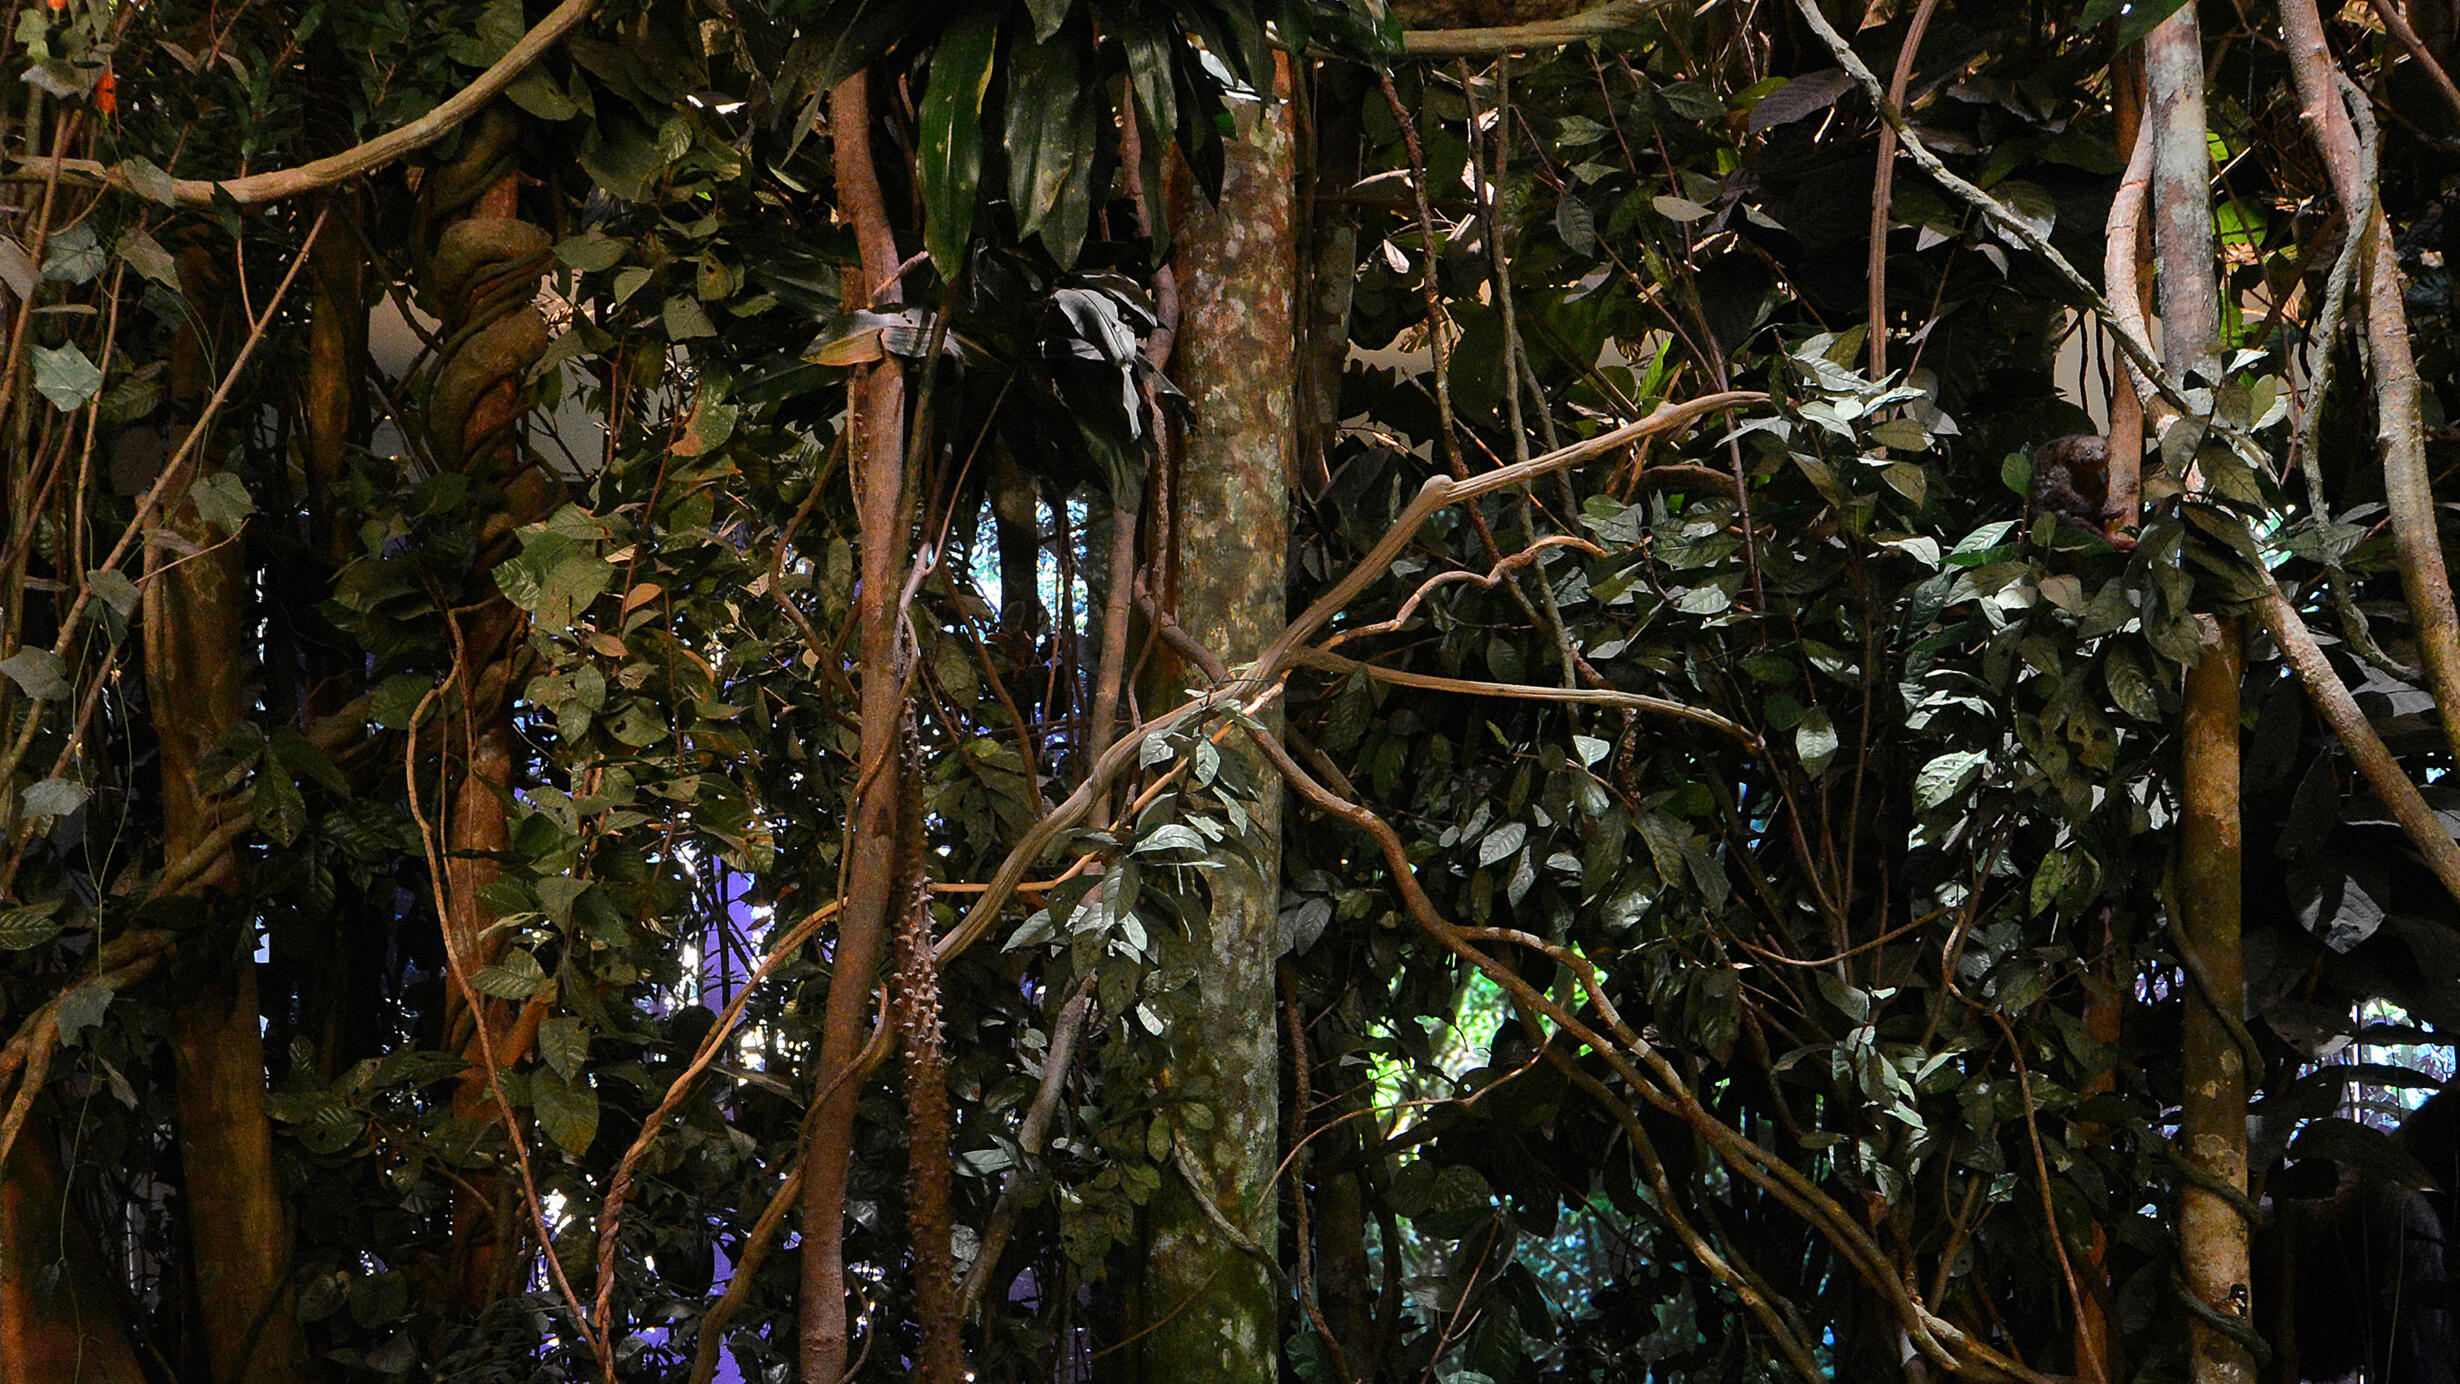 Life-sized representation of plants, trees and animals found in the Dzanga-Sangha rain forest.